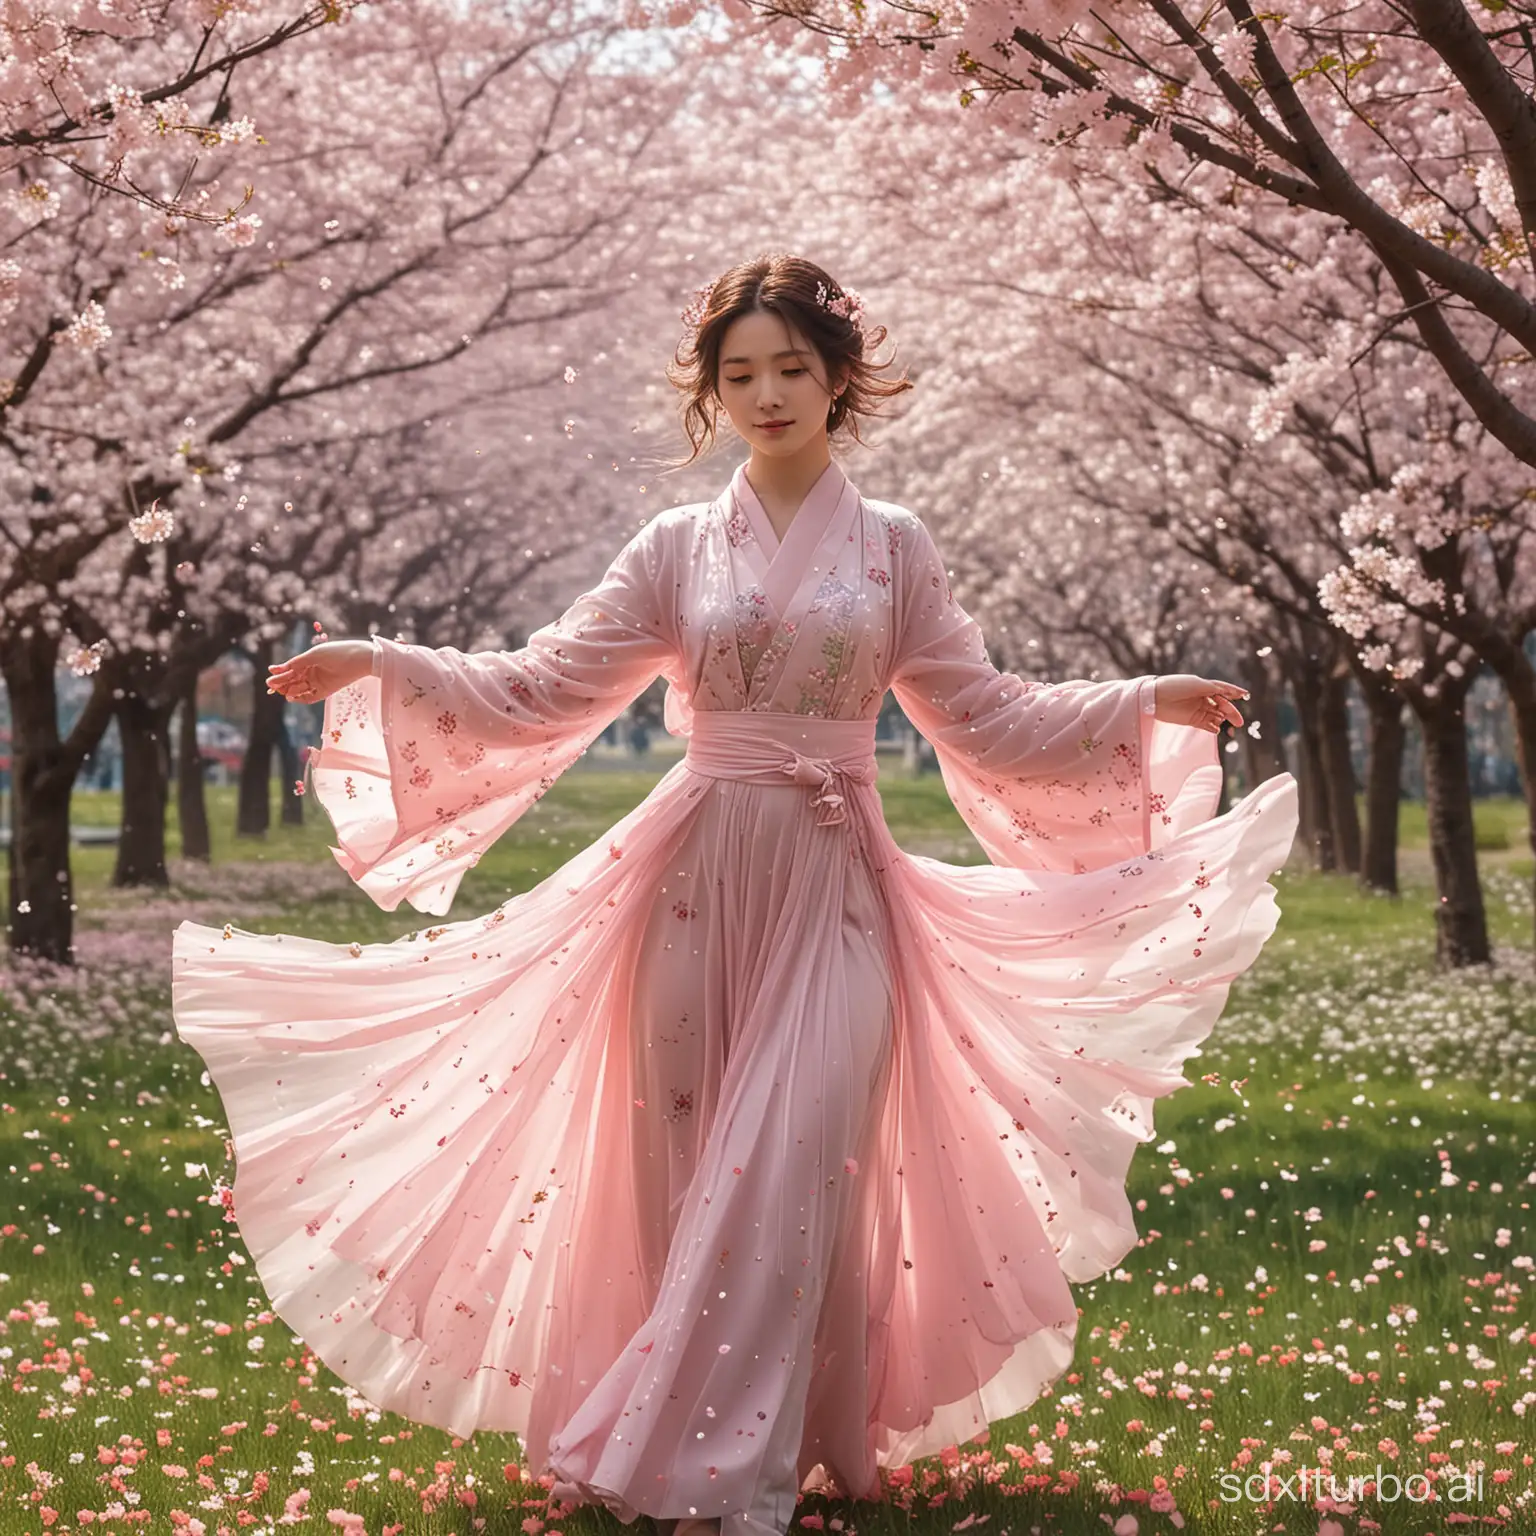 Anime-Enchantress-in-Cherry-Blossom-Meadow